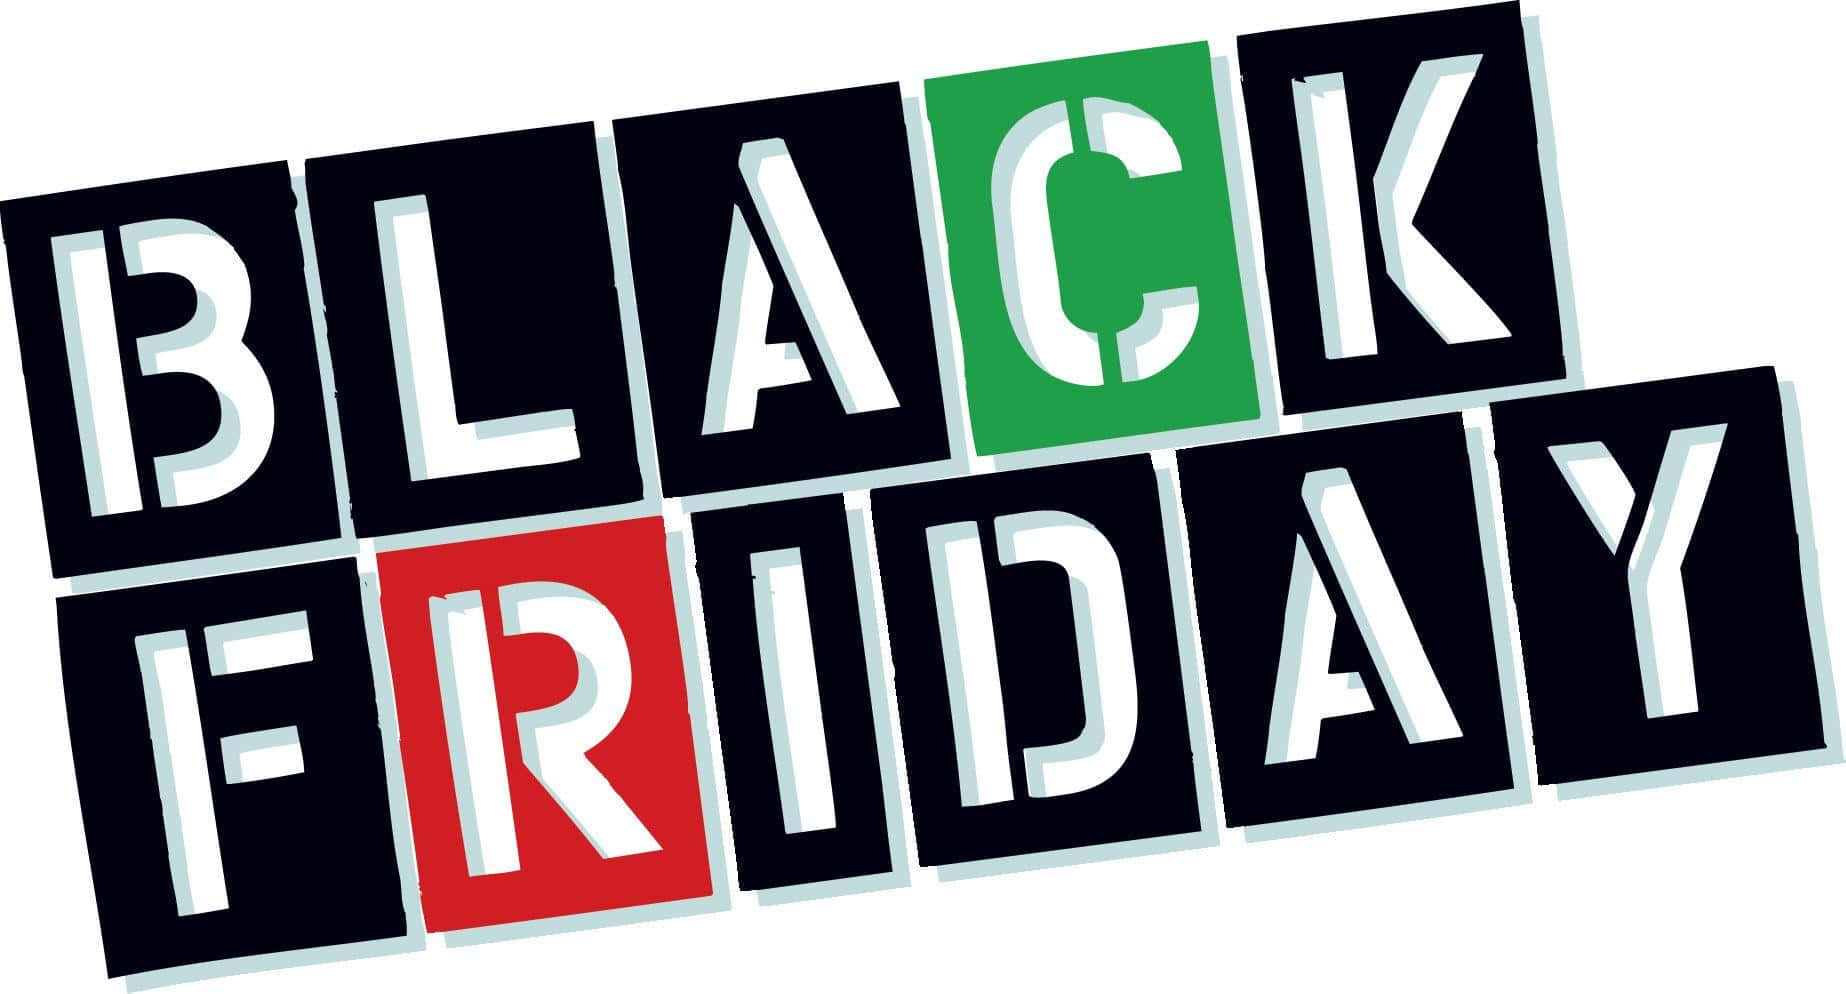 Black Friday Logo With Green, Red And Black Letters